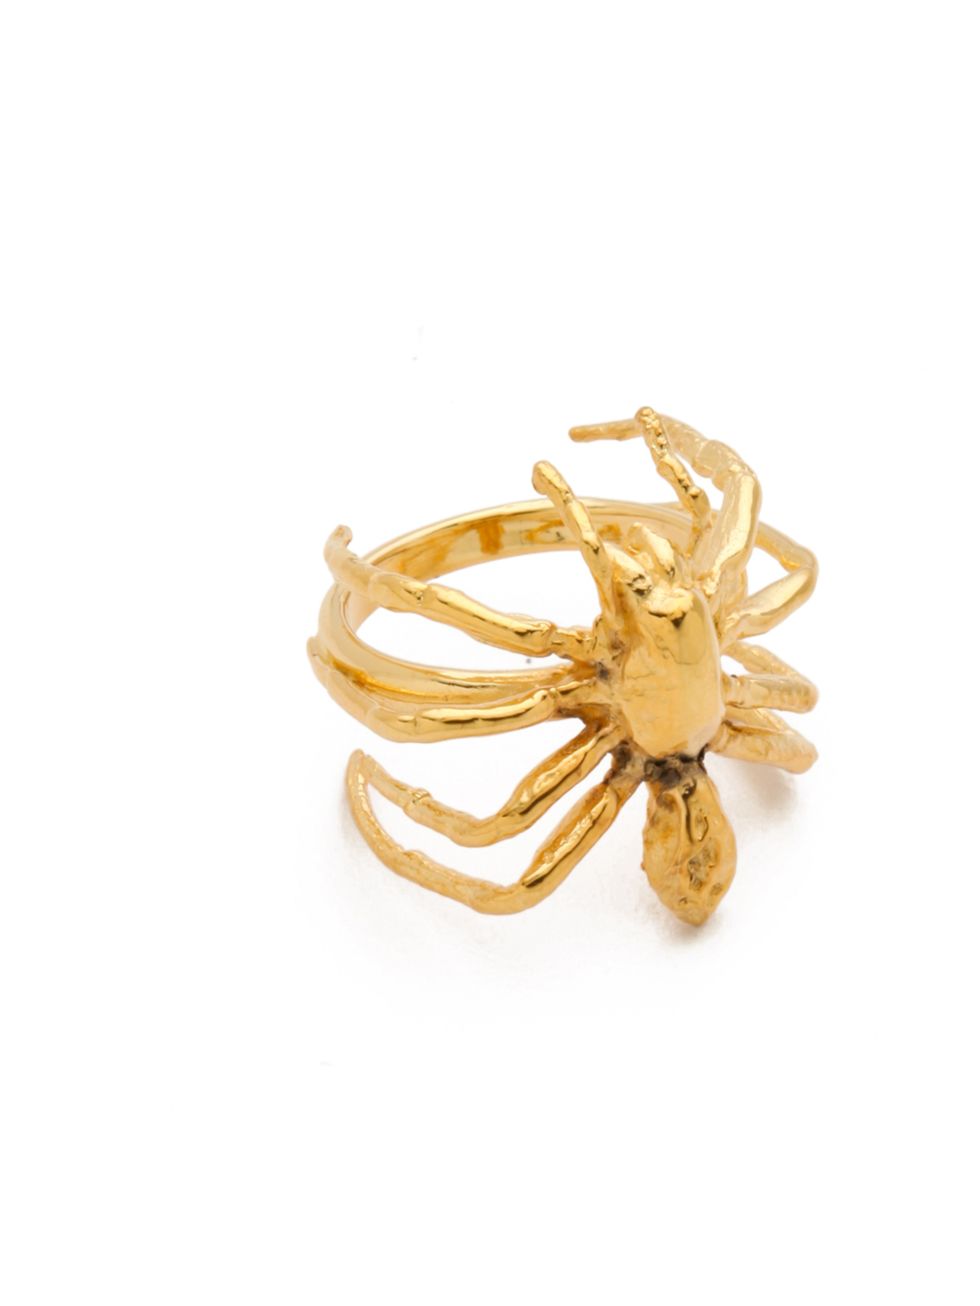 <p>Tom Binns gold spider ring, £71.24, at Shopbop.com</p><p><a href="http://shopping.elleuk.com/browse?fts=tom+binns+spider">BUY NOW</a></p>